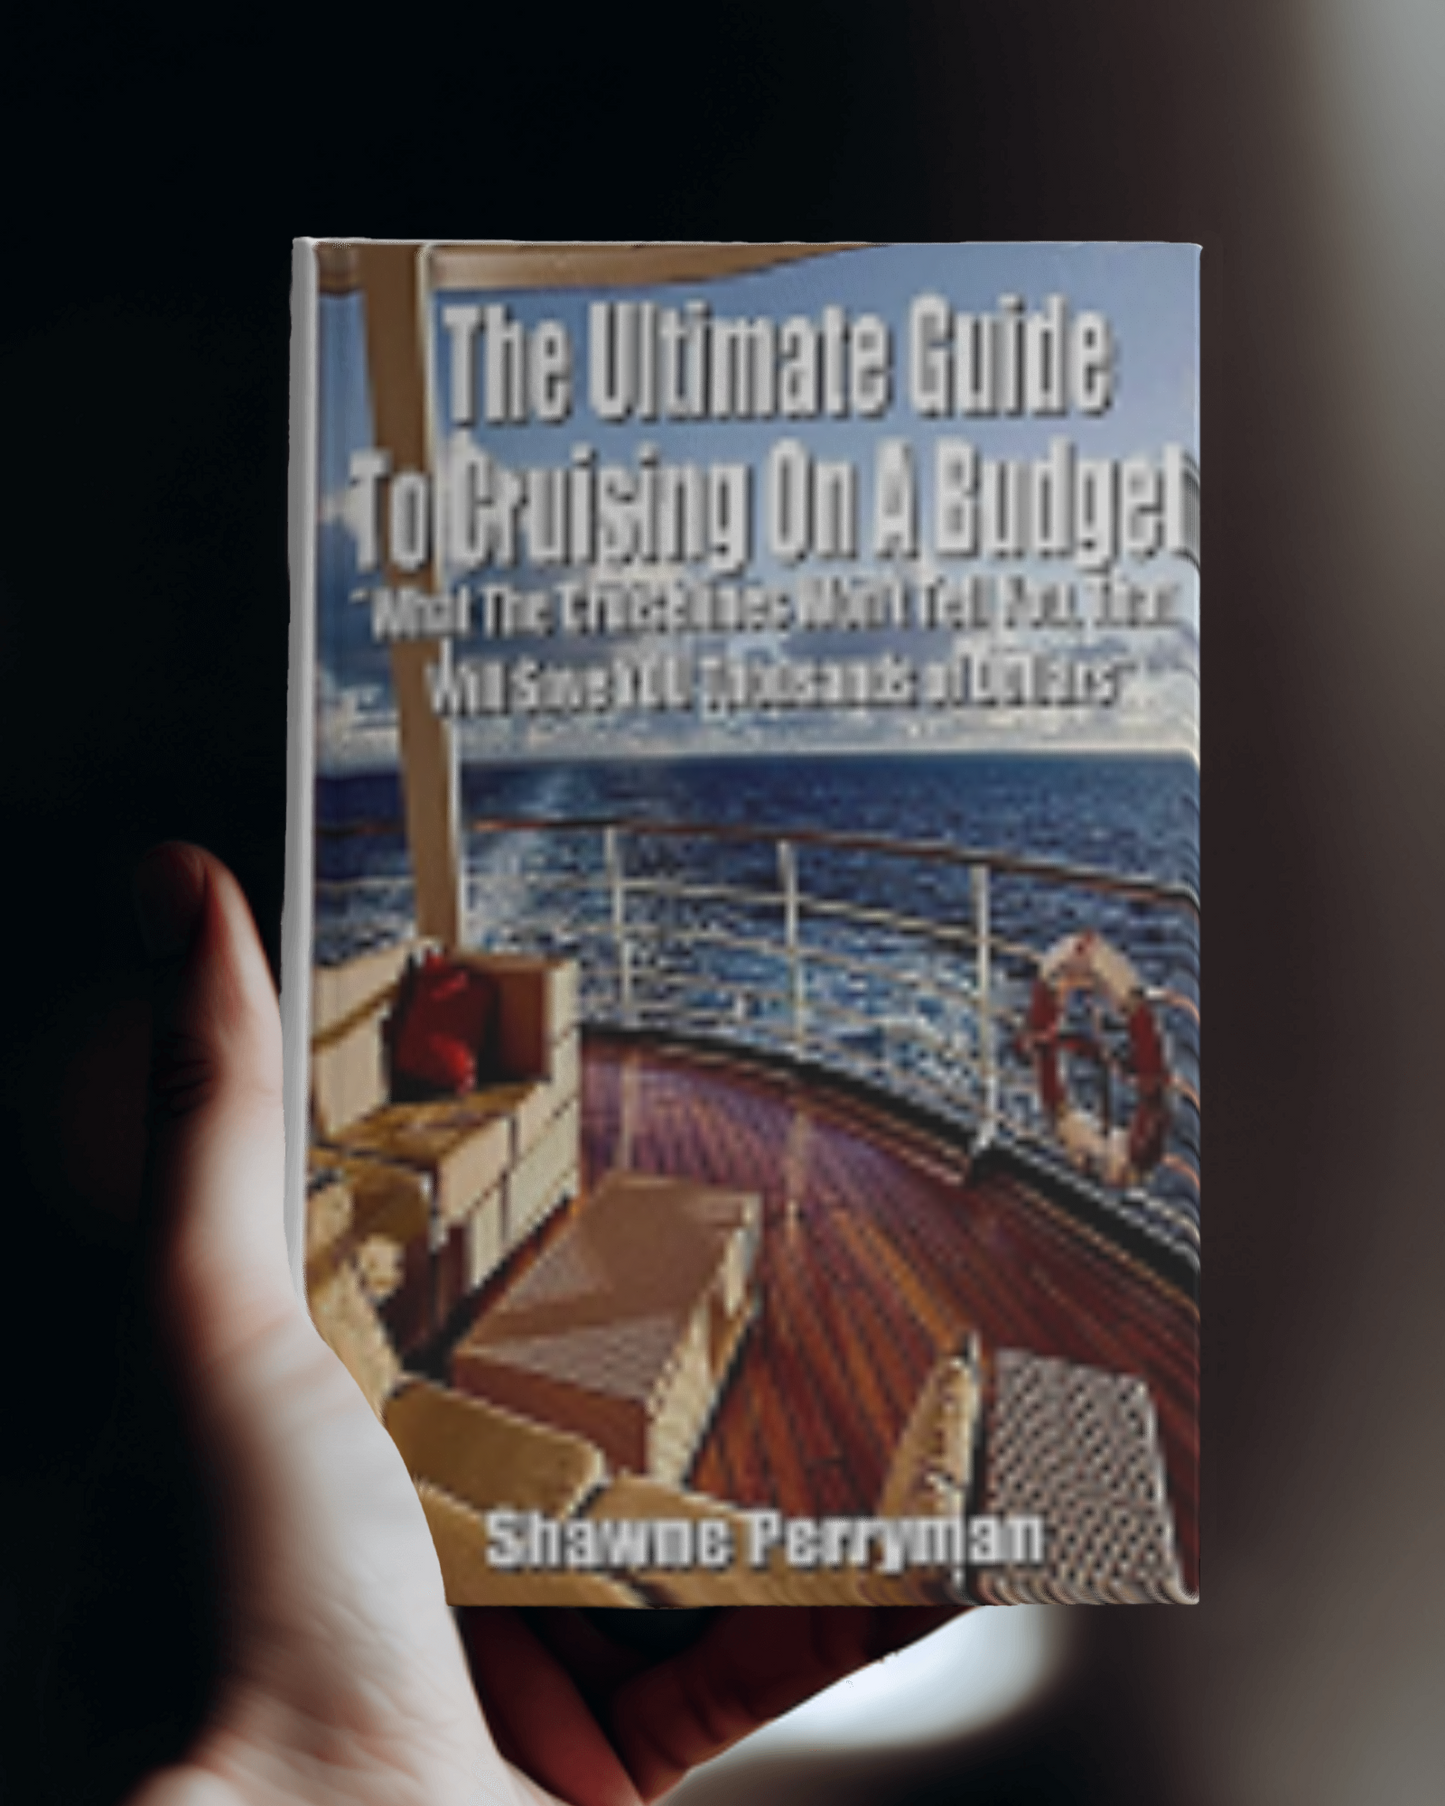 The Ultimate Guide to Cruising on a Budget